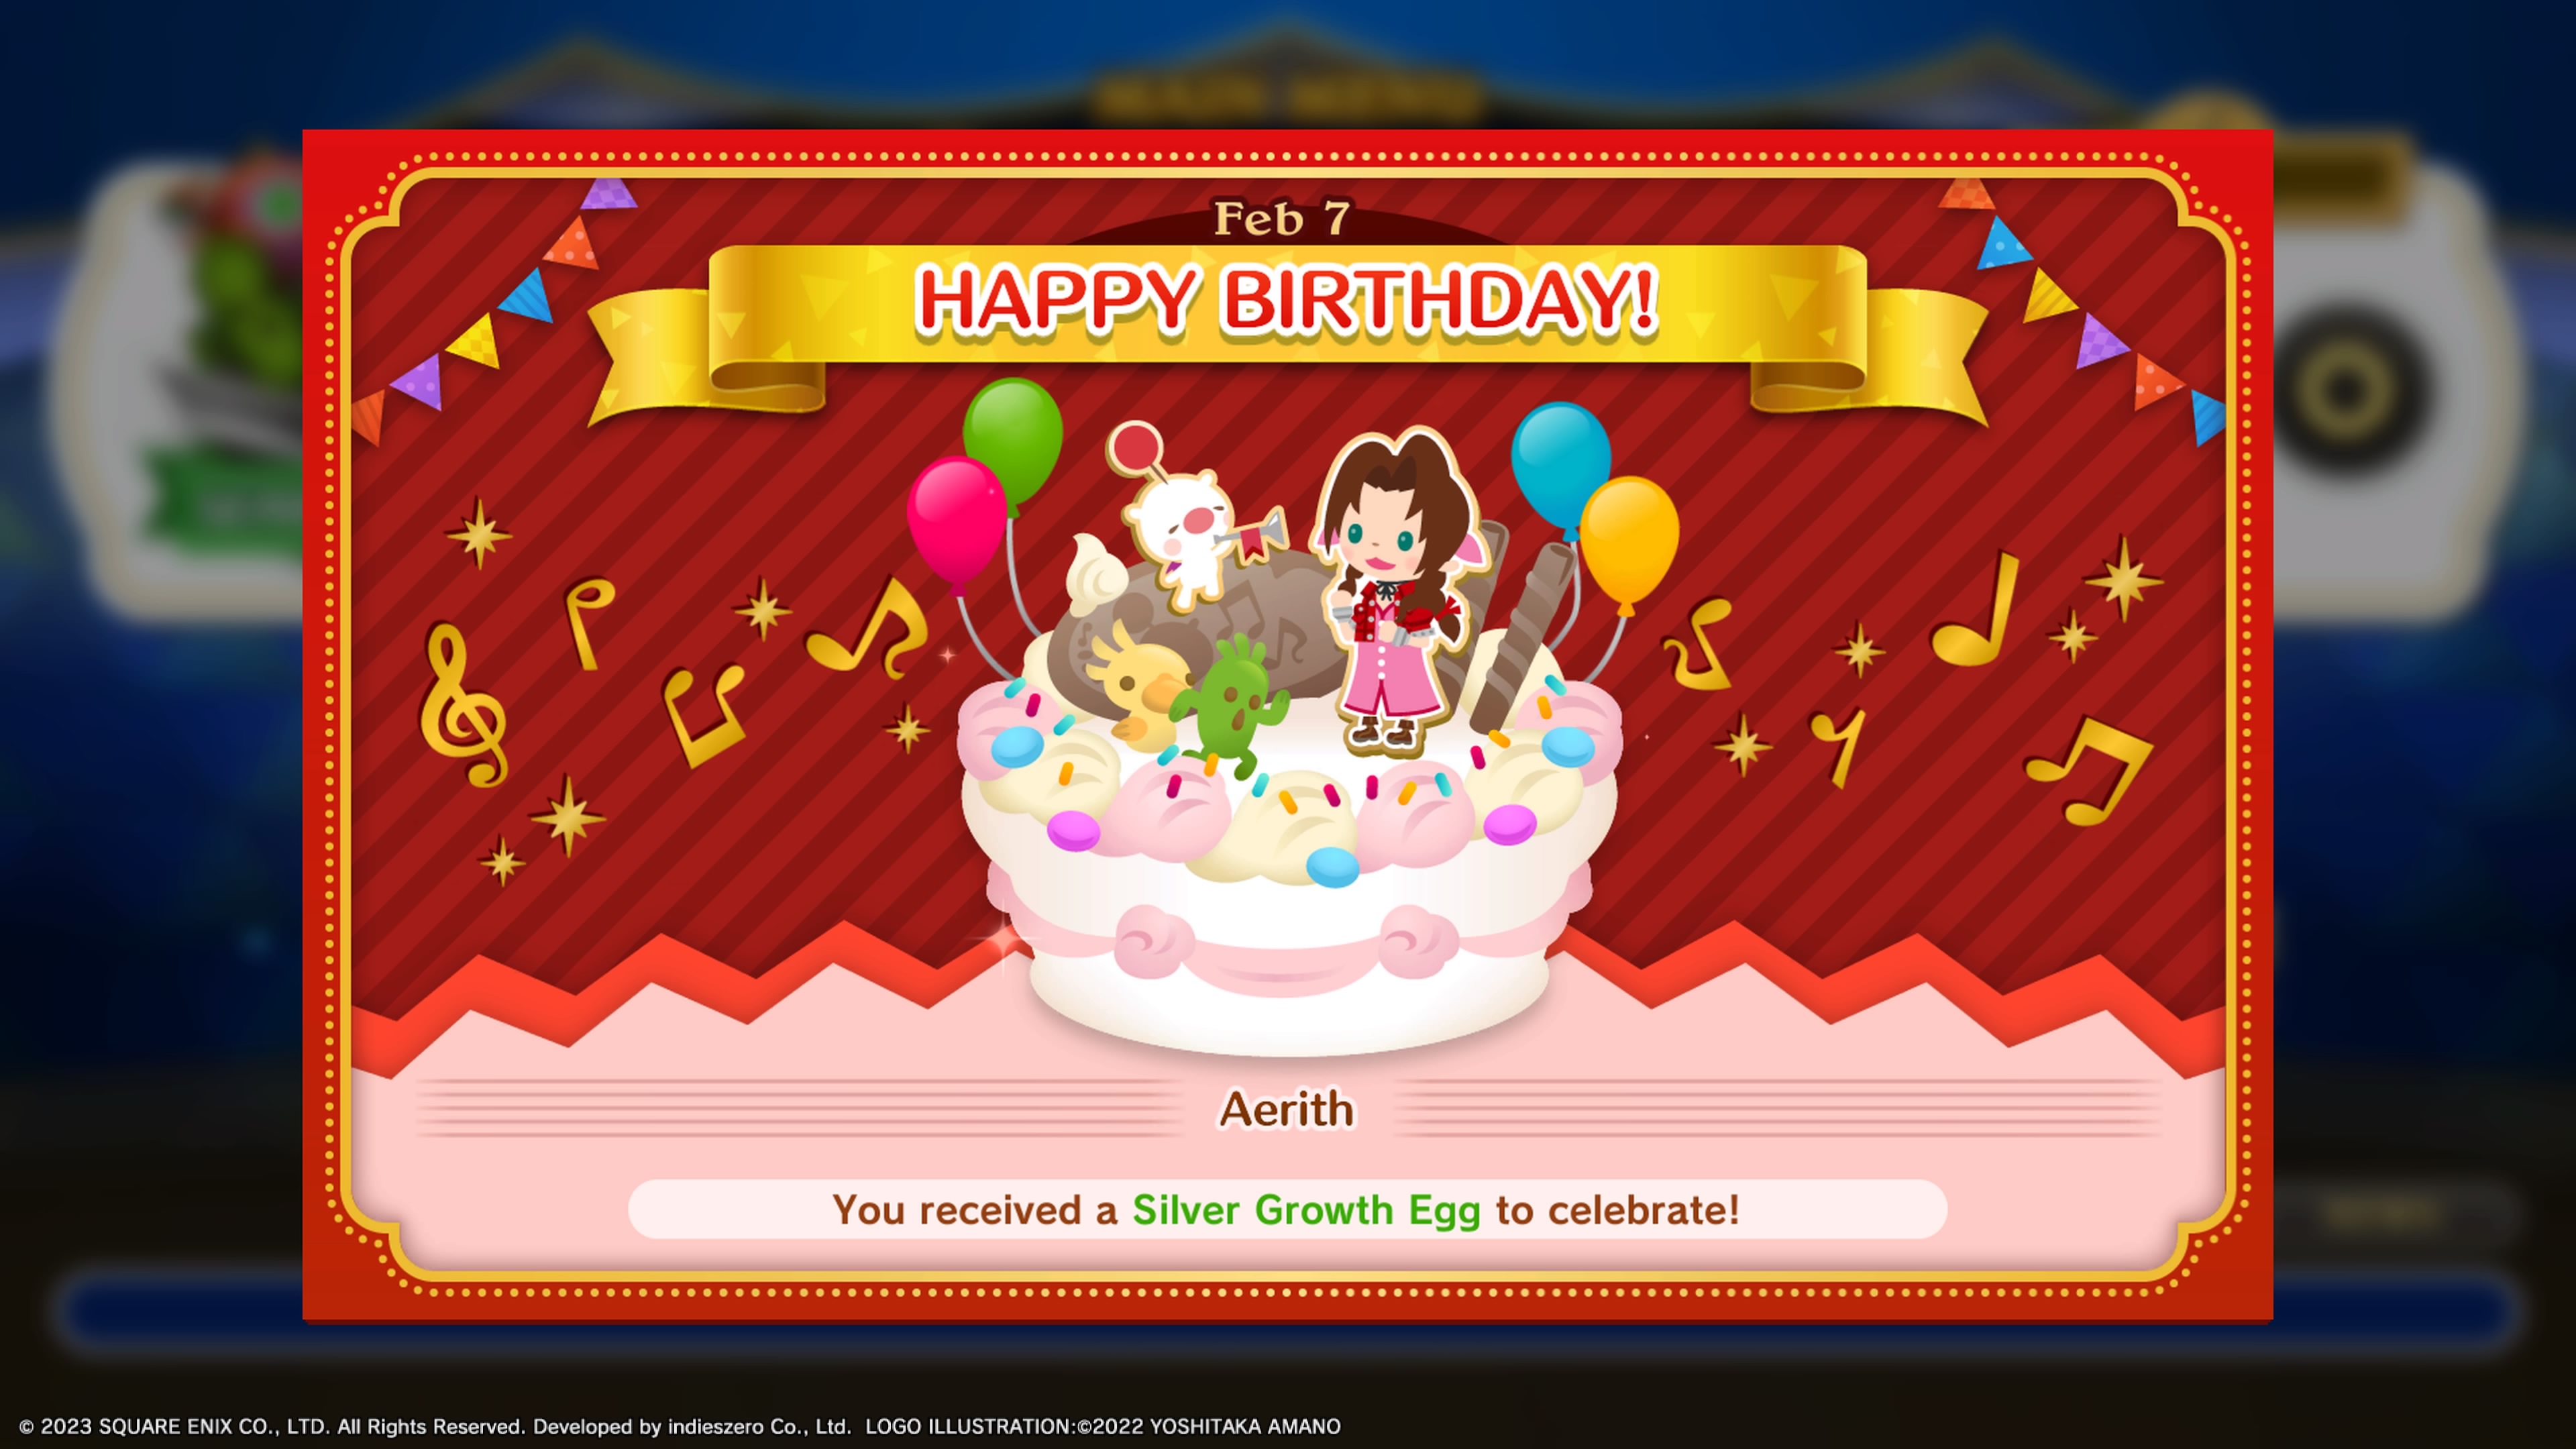 Visit Theatrhythm Final Bar Line on Final Fantasy Character or Game's Birthday